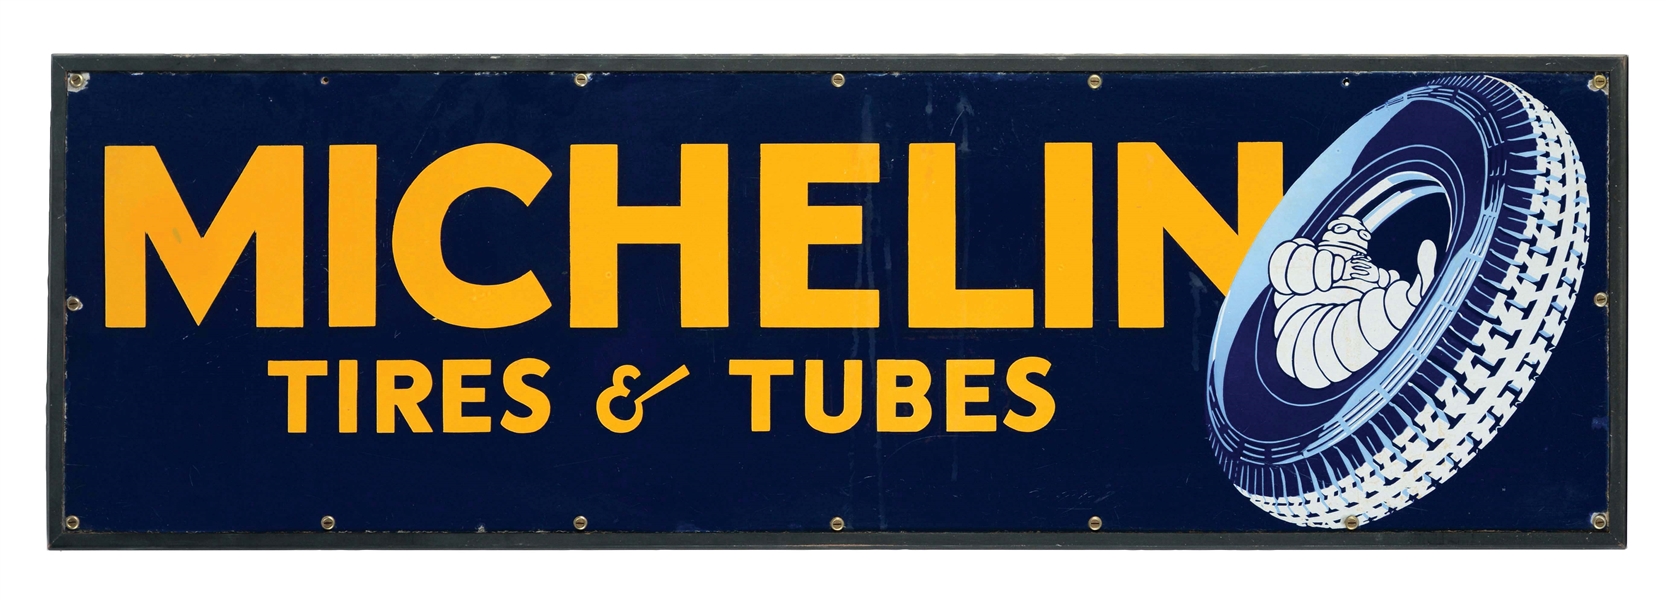 RARE MICHELIN TIRES & TUBES PORCELAIN SIGN WITH BIBENDUM IN TIRE GRAPHIC.